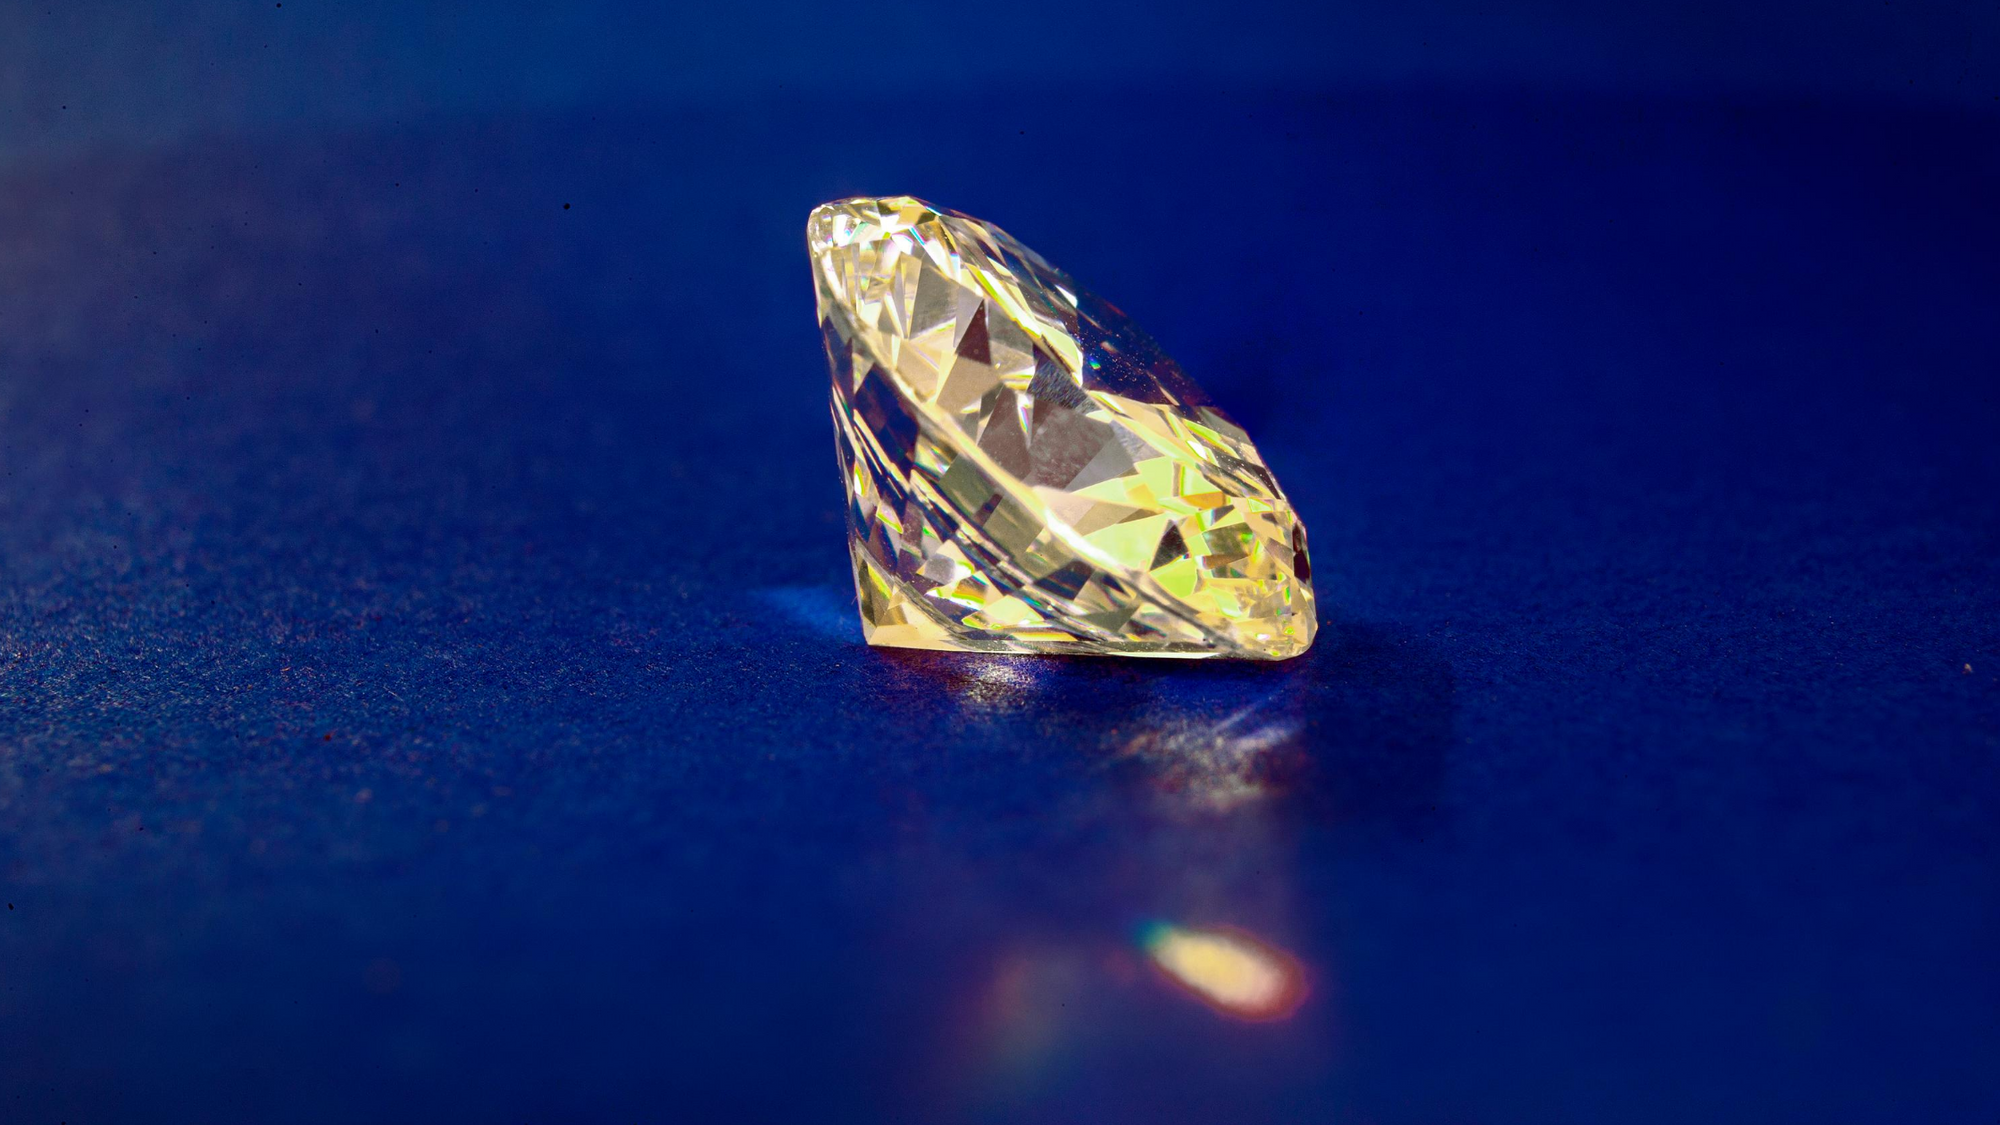 Replacing Diamonds With Cubic Zirconia Stones - Everything You Need to Know